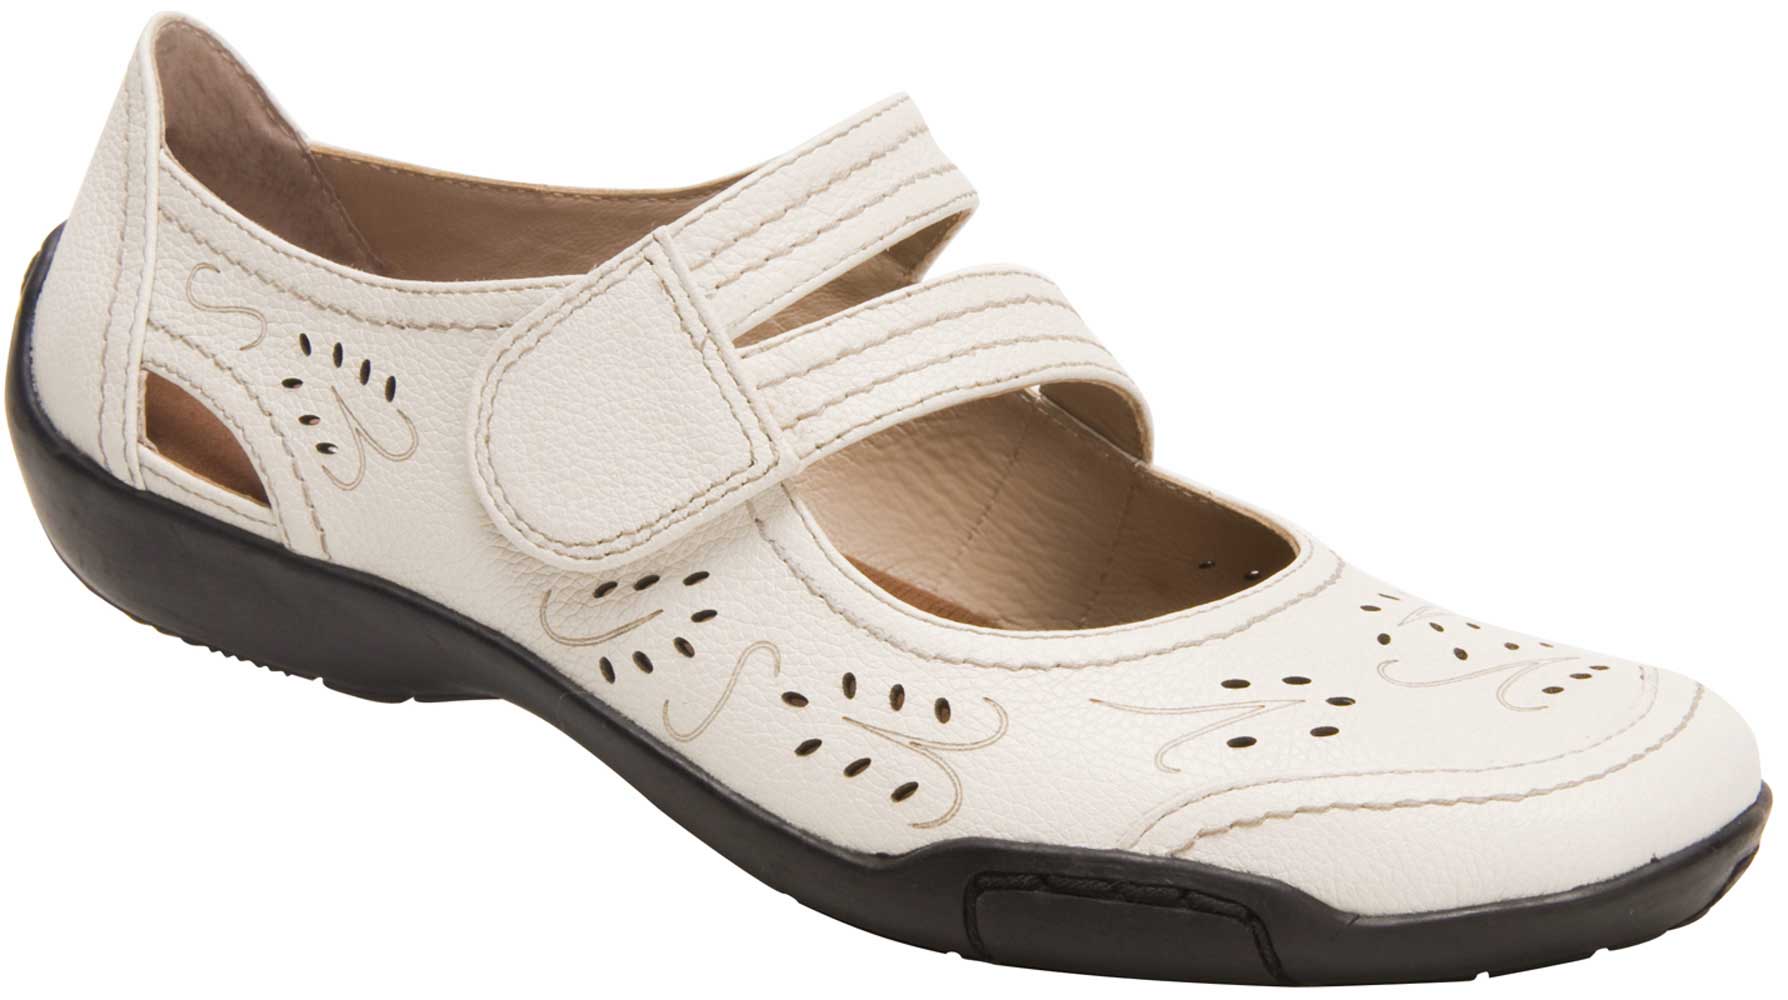 The Ros Hommerson Chelsea Slip on Casual Comfort Shoe